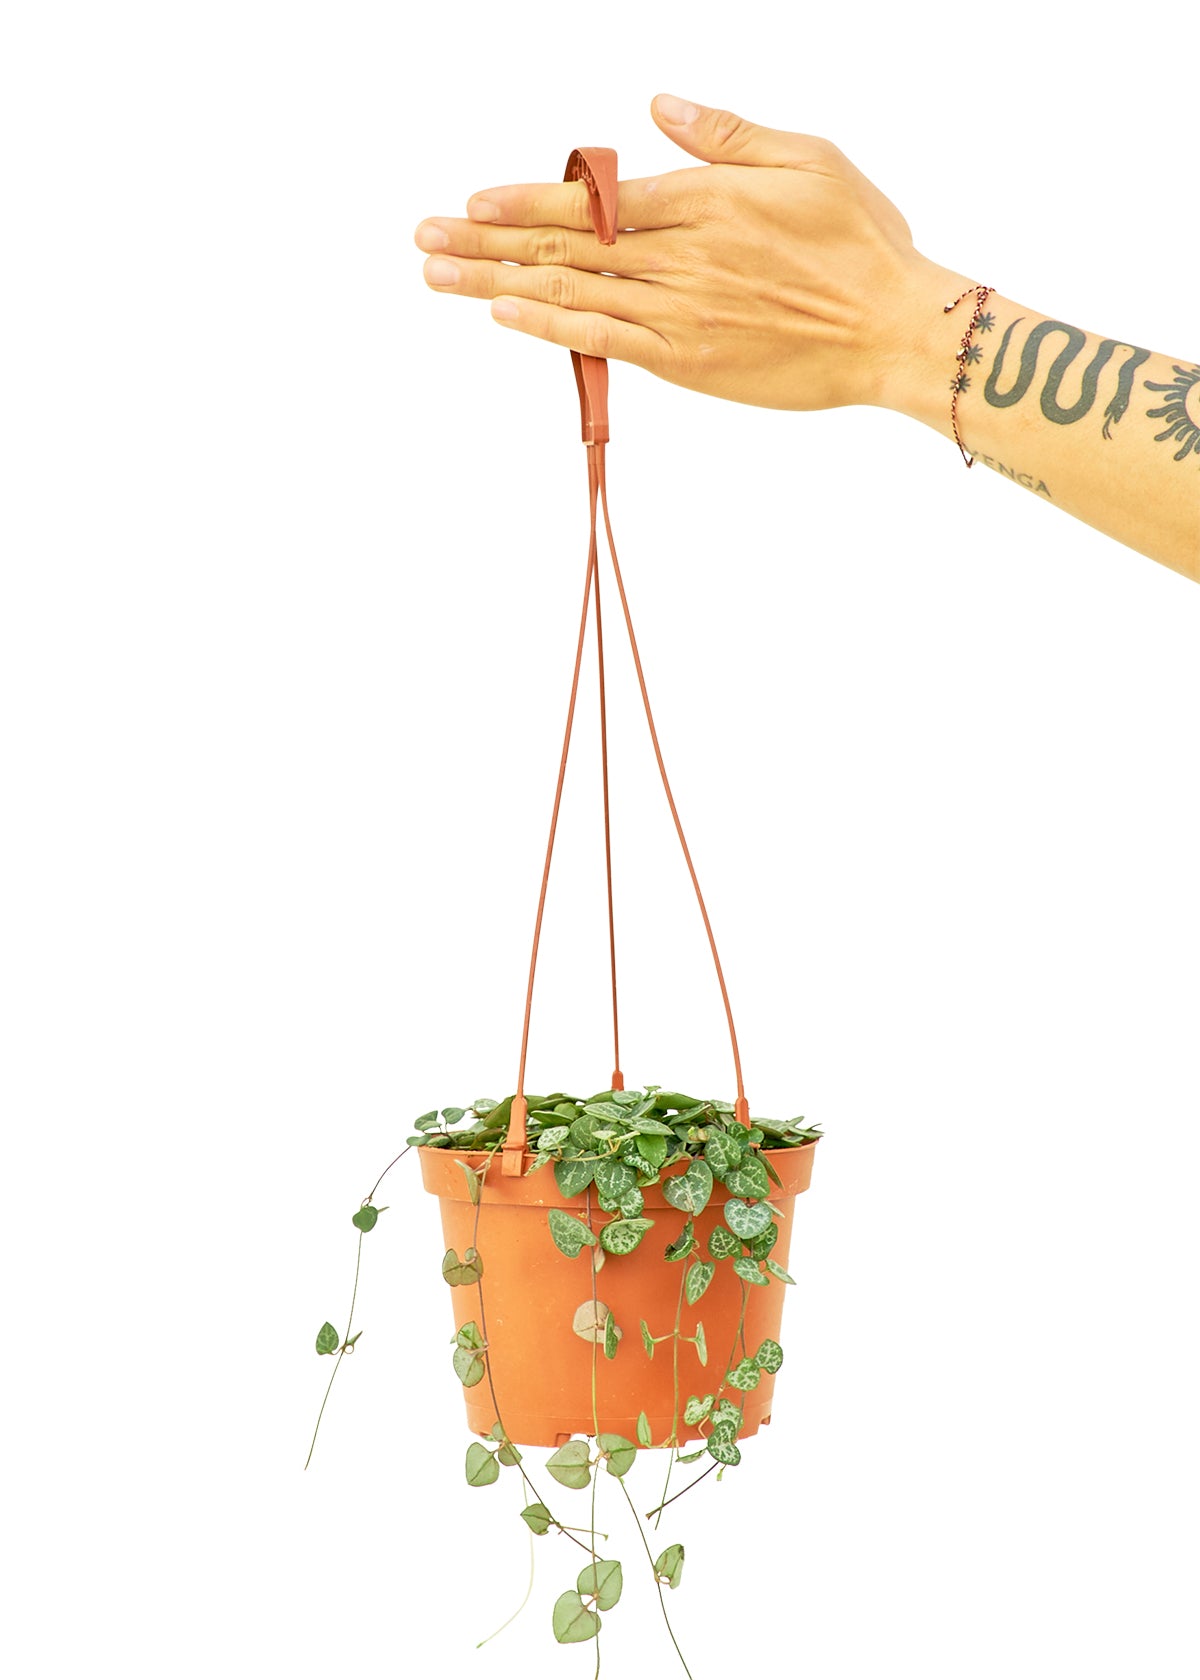 Medium size String of Hearts Hanging Plant in a growers pot with a white background with a hand holding the hook